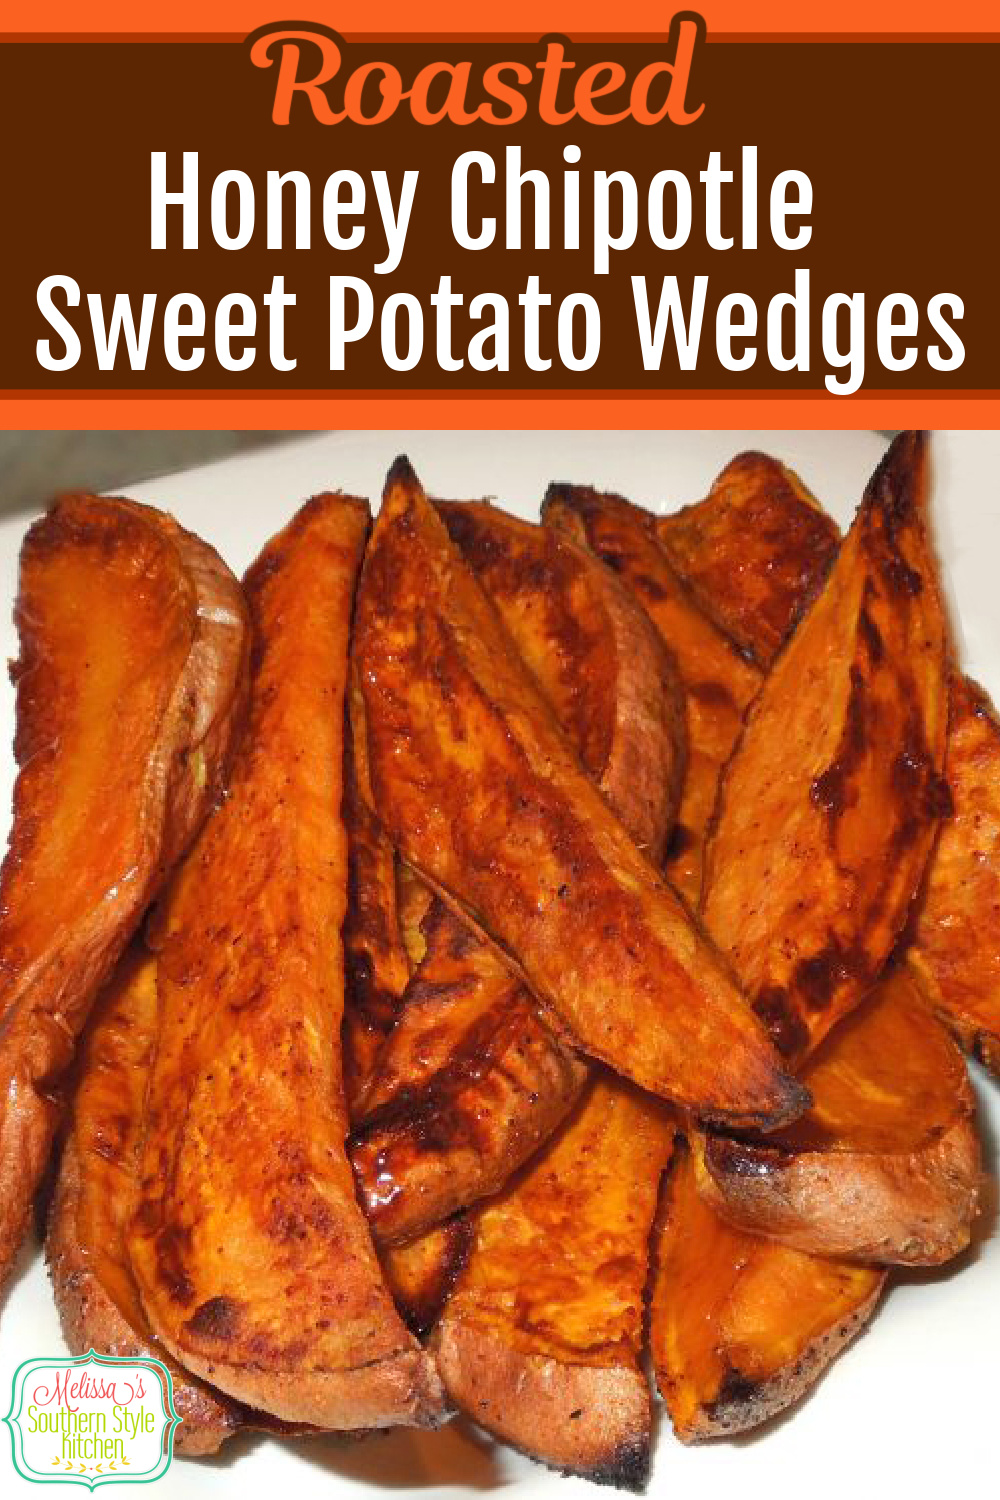 Up your side dish game with these Roasted Honey Chipotle Sweet Potato Wedges #sweetpotatoes #sweetpotatorecipes #sweetpotatofries #healthy #easyrecipes #sidedishrecipes #appetizers #southernrecipes #southernfood #honey #chipotlepeppers #melissassouthernstylekitchen via @melissasssk